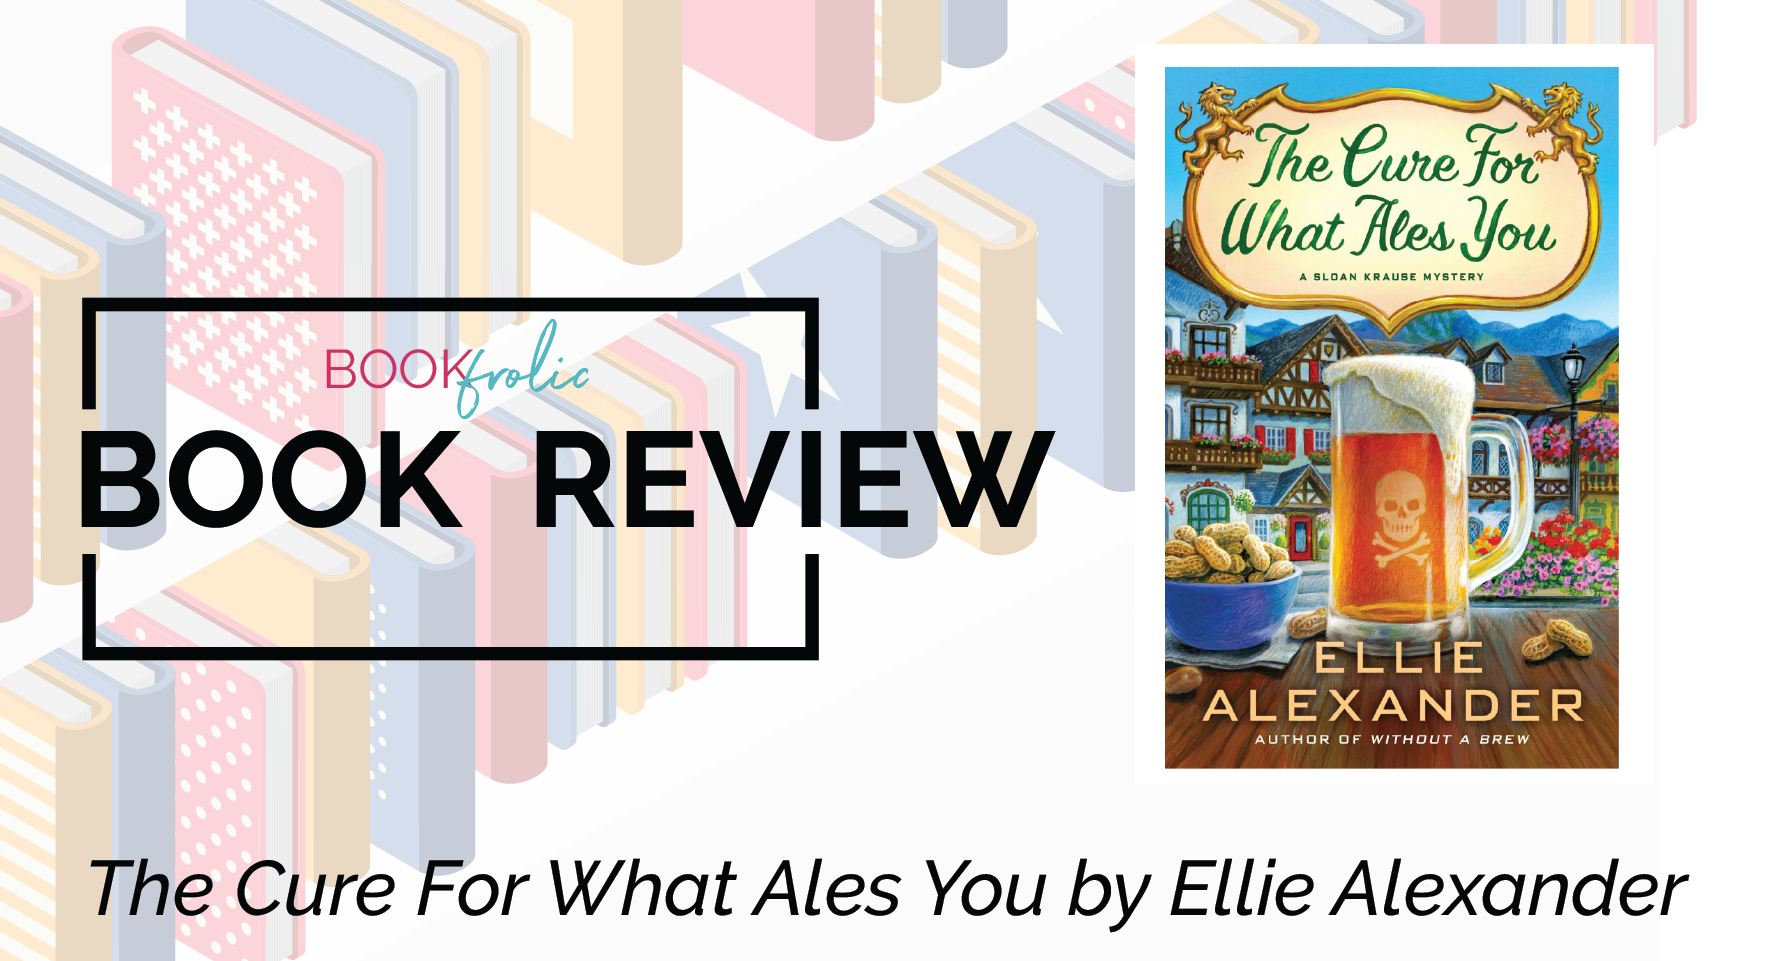 banner for book review of The Cure for What Ales You by Ellie Alexander